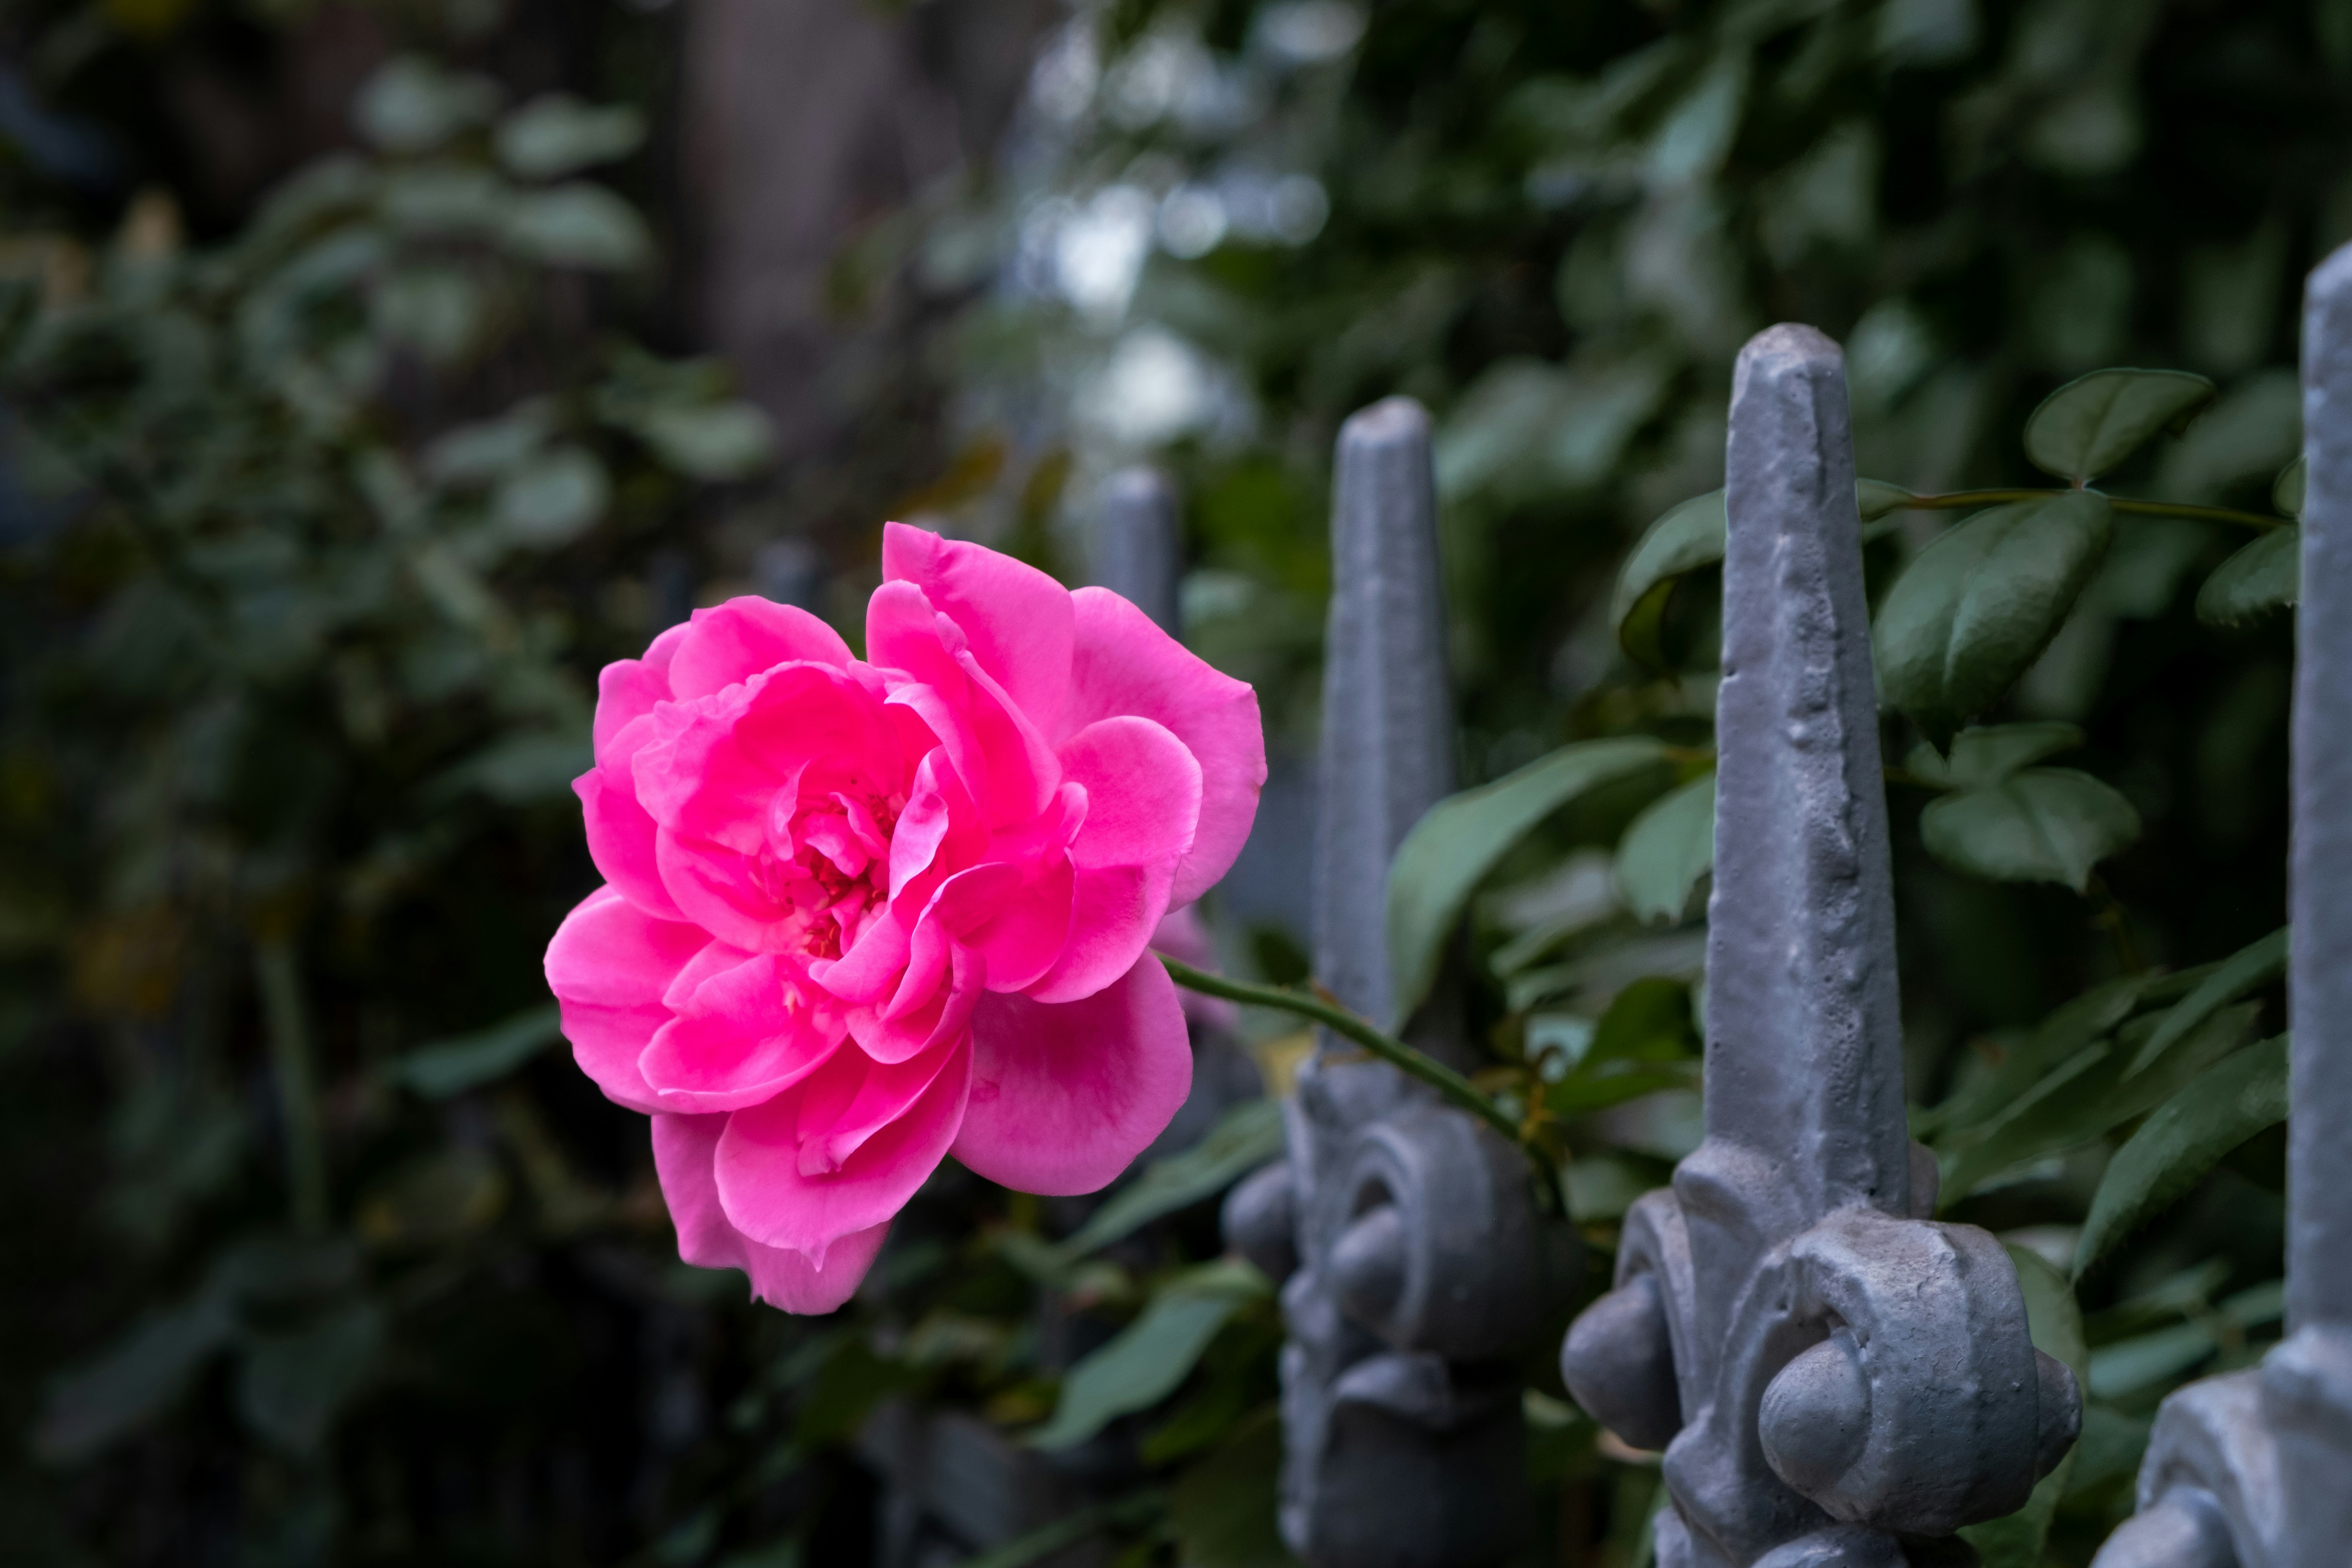 a single pink rose poking through a dark wrought iron fence in front of bushes